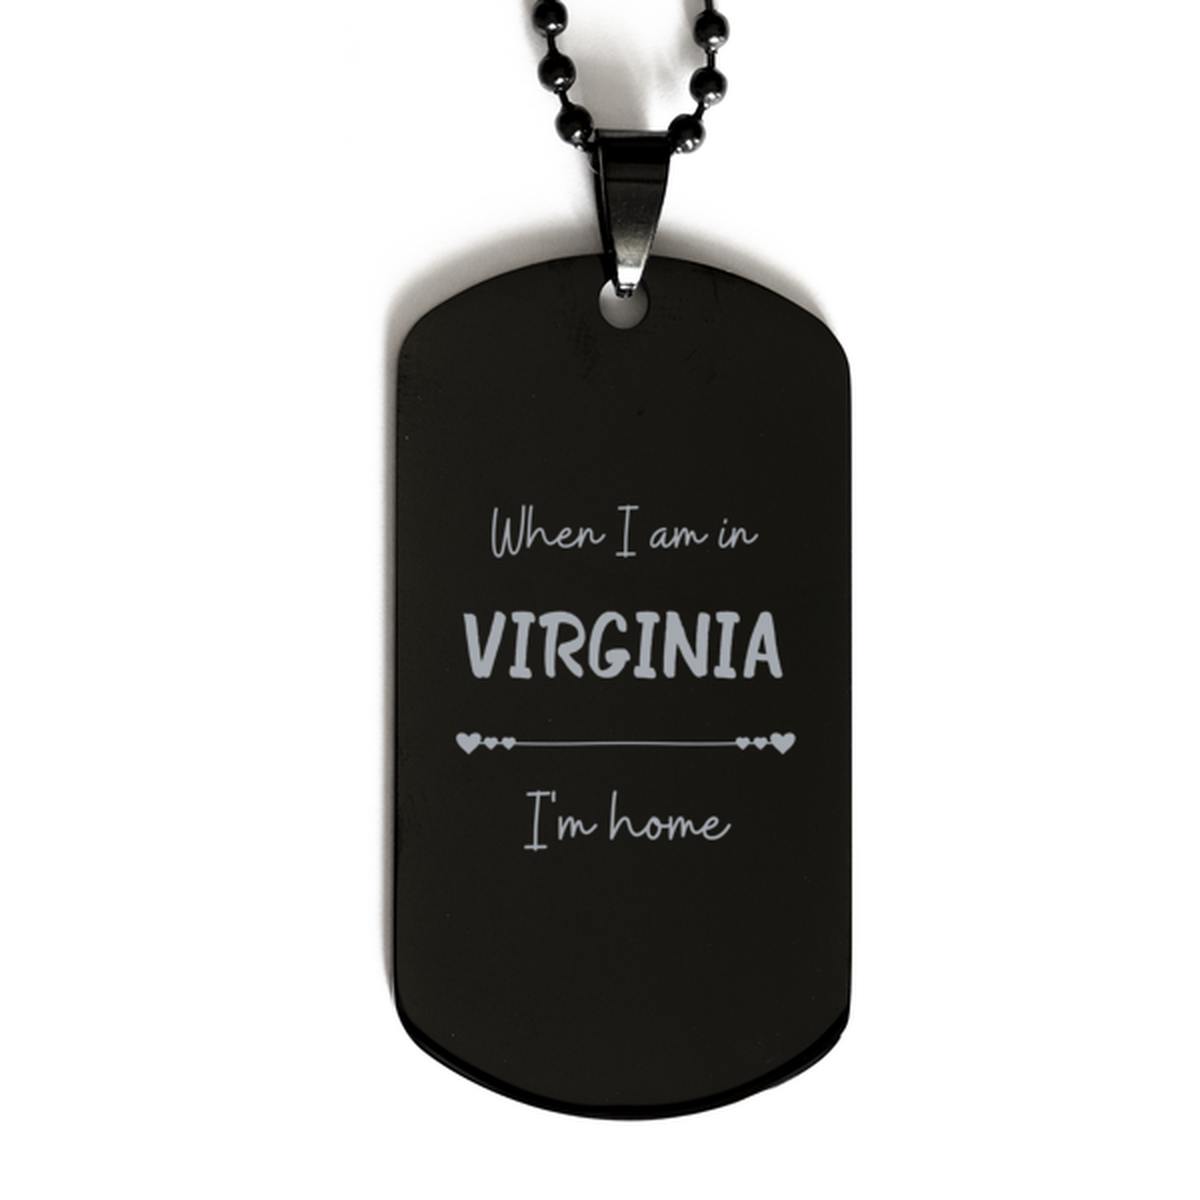 When I am in Virginia I'm home Black Dog Tag, Cheap Gifts For Virginia, State Virginia Birthday Gifts for Friends Coworker